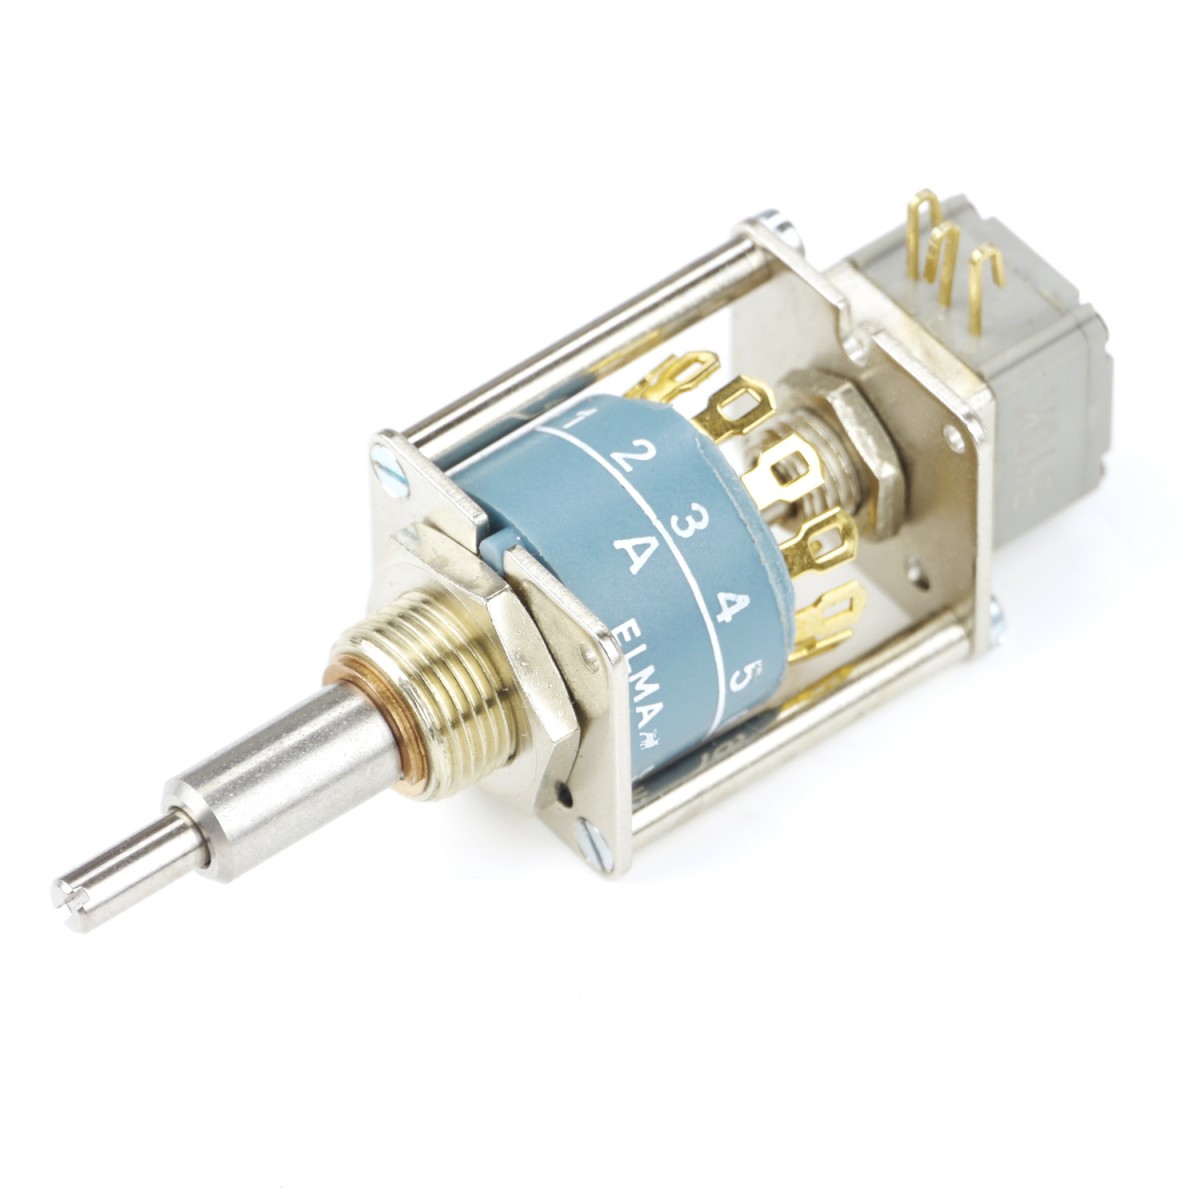 Elma Rotary switch Type 01 Concentric with 10k Linear Potentiometer